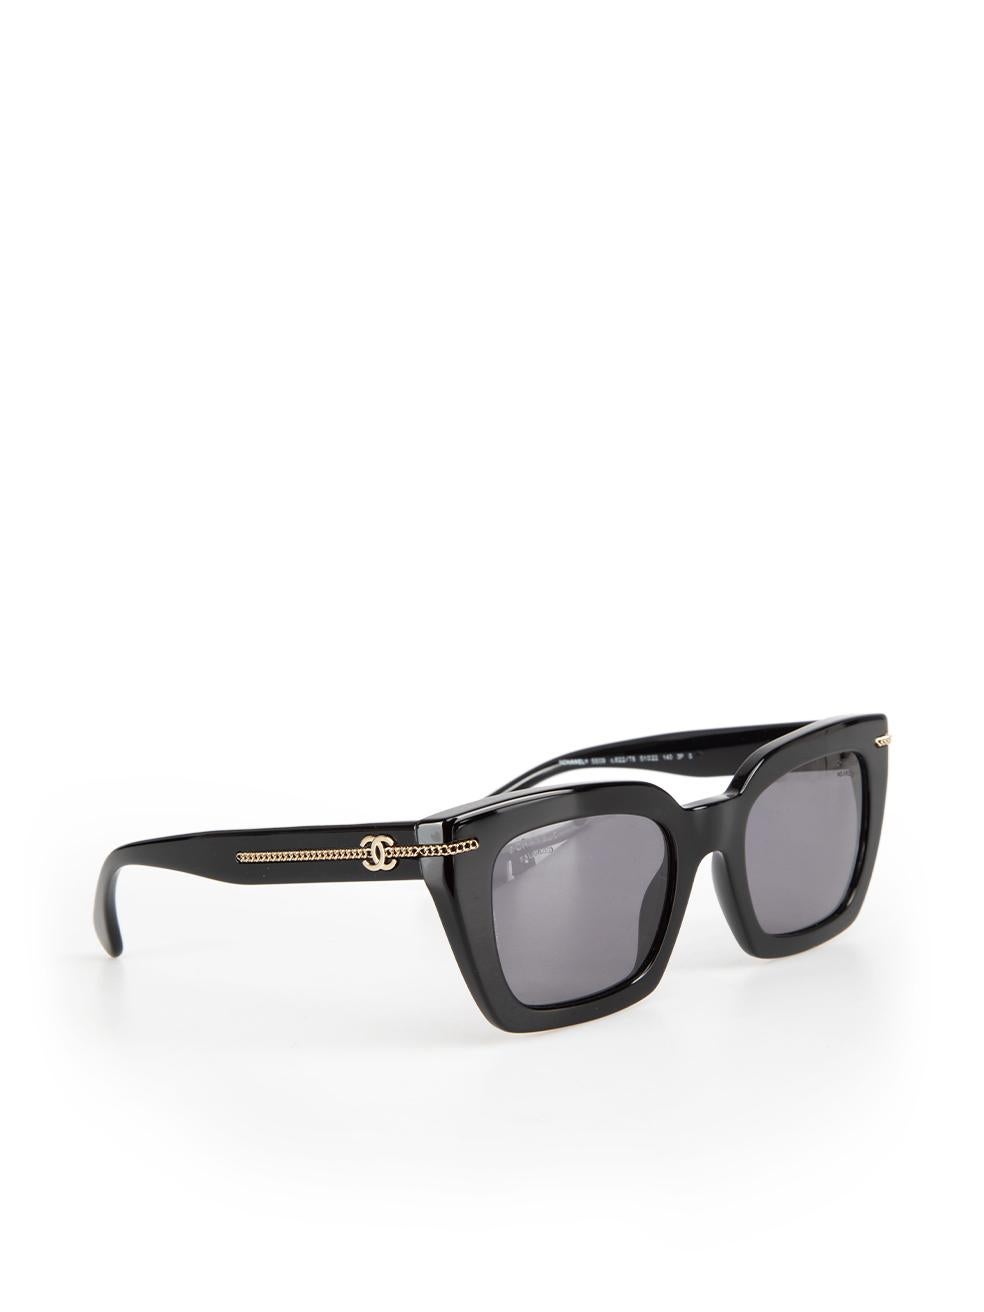 Chanel Black Square Logo Chain Detail Sunglasses In New Condition For Sale In London, GB